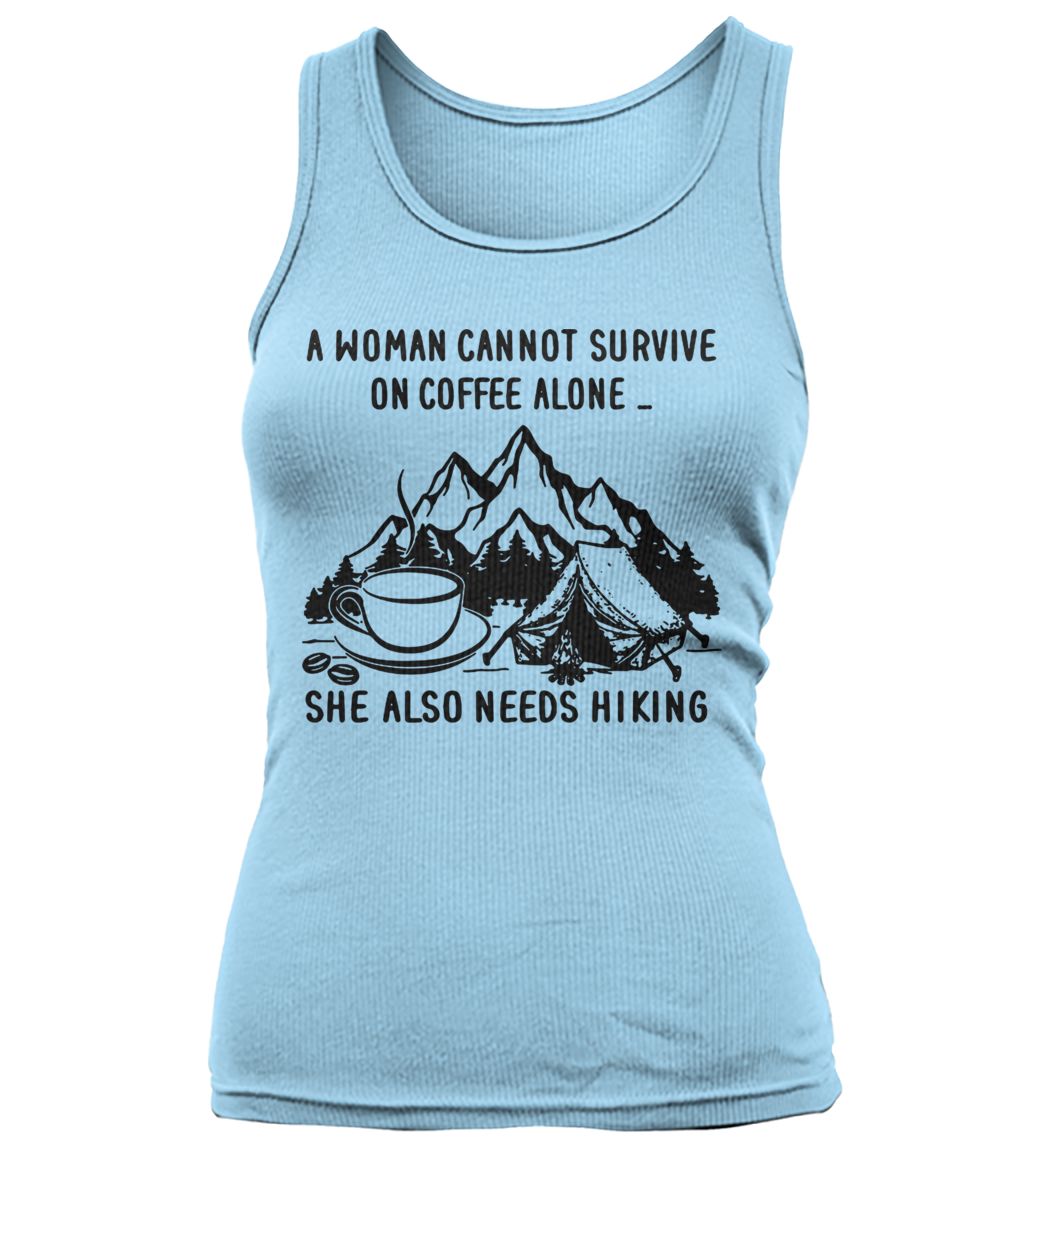 A woman cannot survive on coffee alone she also needs hiking women's tank top